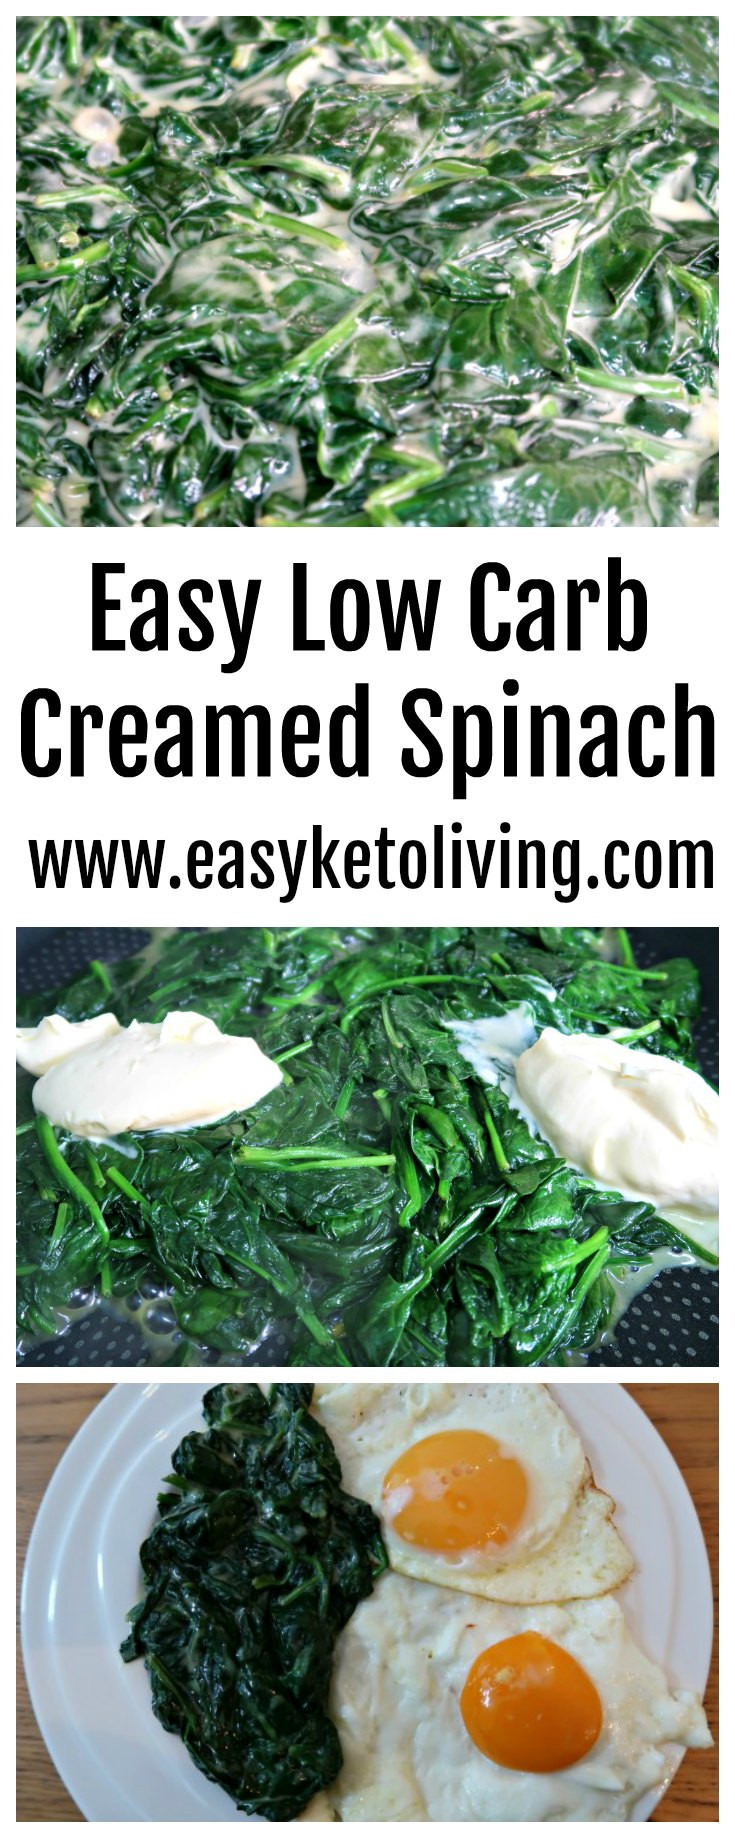 Low Carb Spinach Recipes
 Low Carb Creamed Spinach Recipe Easy Keto Creamed Spinach